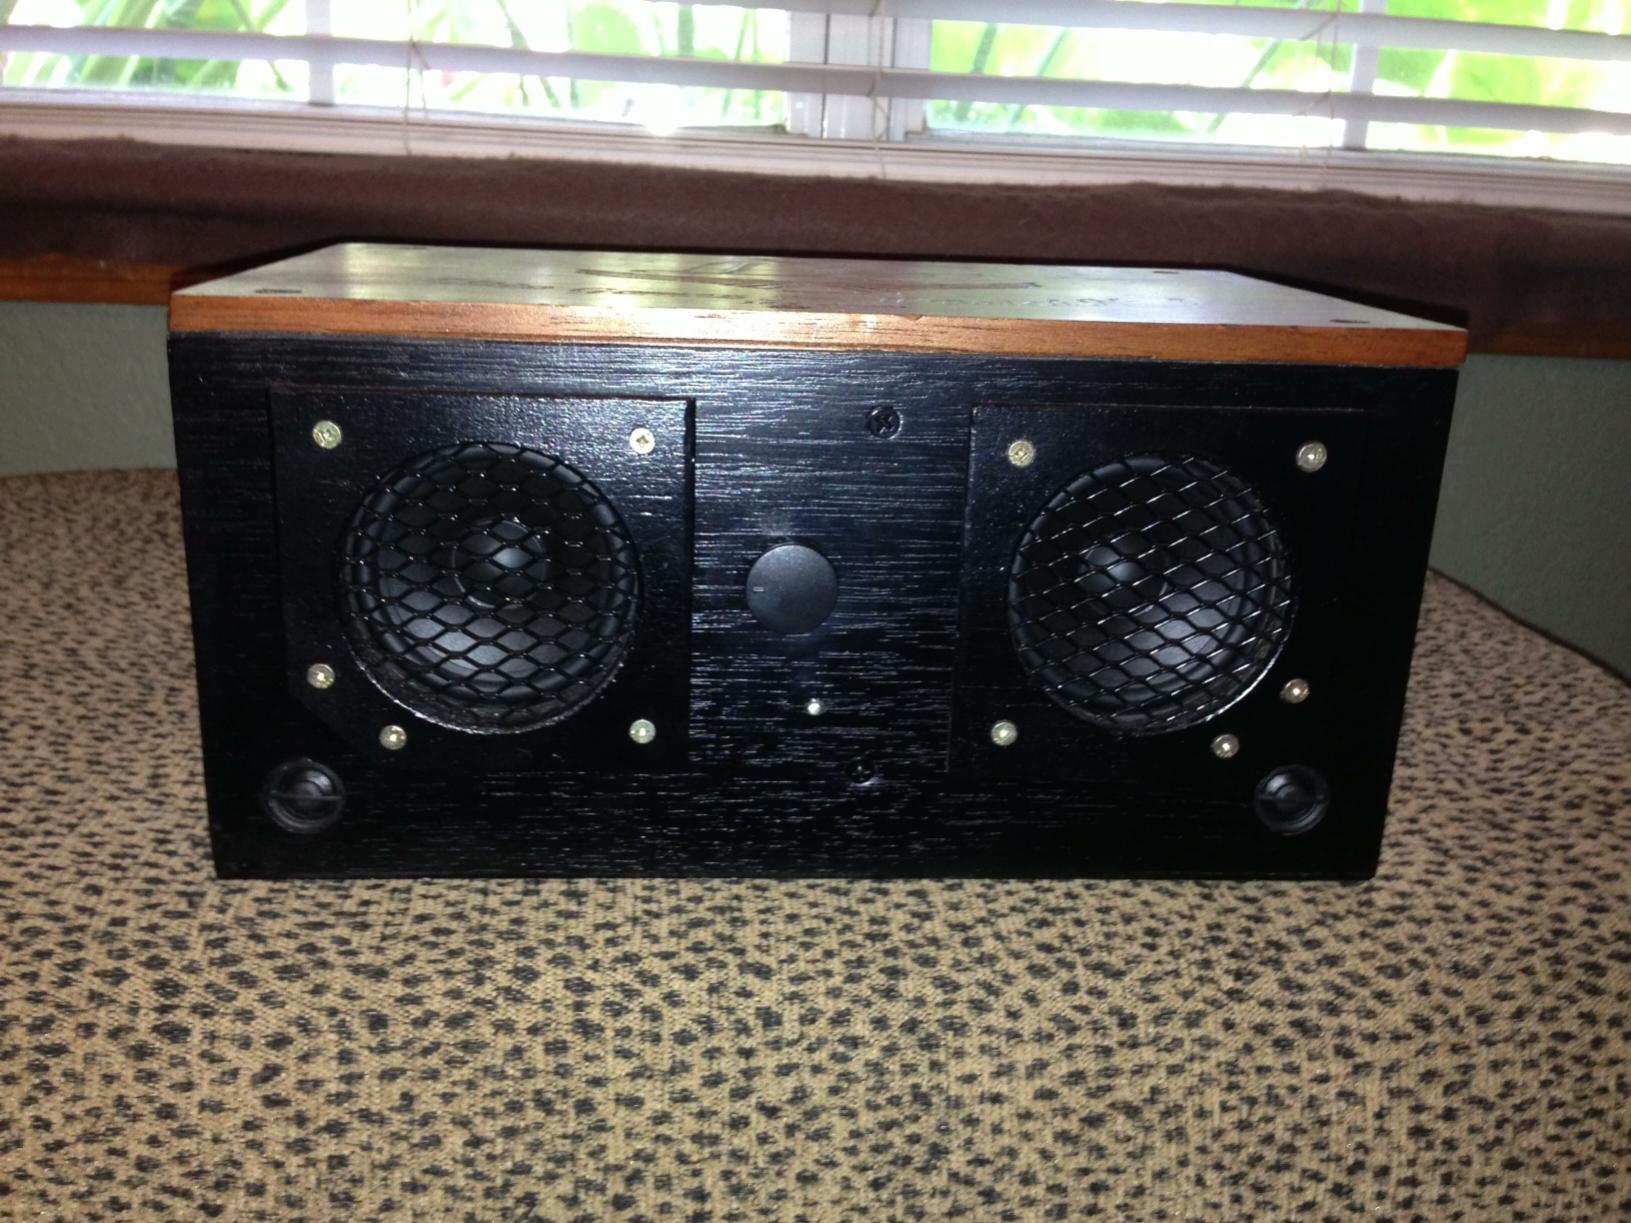 This was the back of the box but now it is the front of the system.  I painted it because someone had written on it with a black sharpie.  This unit has nice pencil tweeters installed in the lower corners.